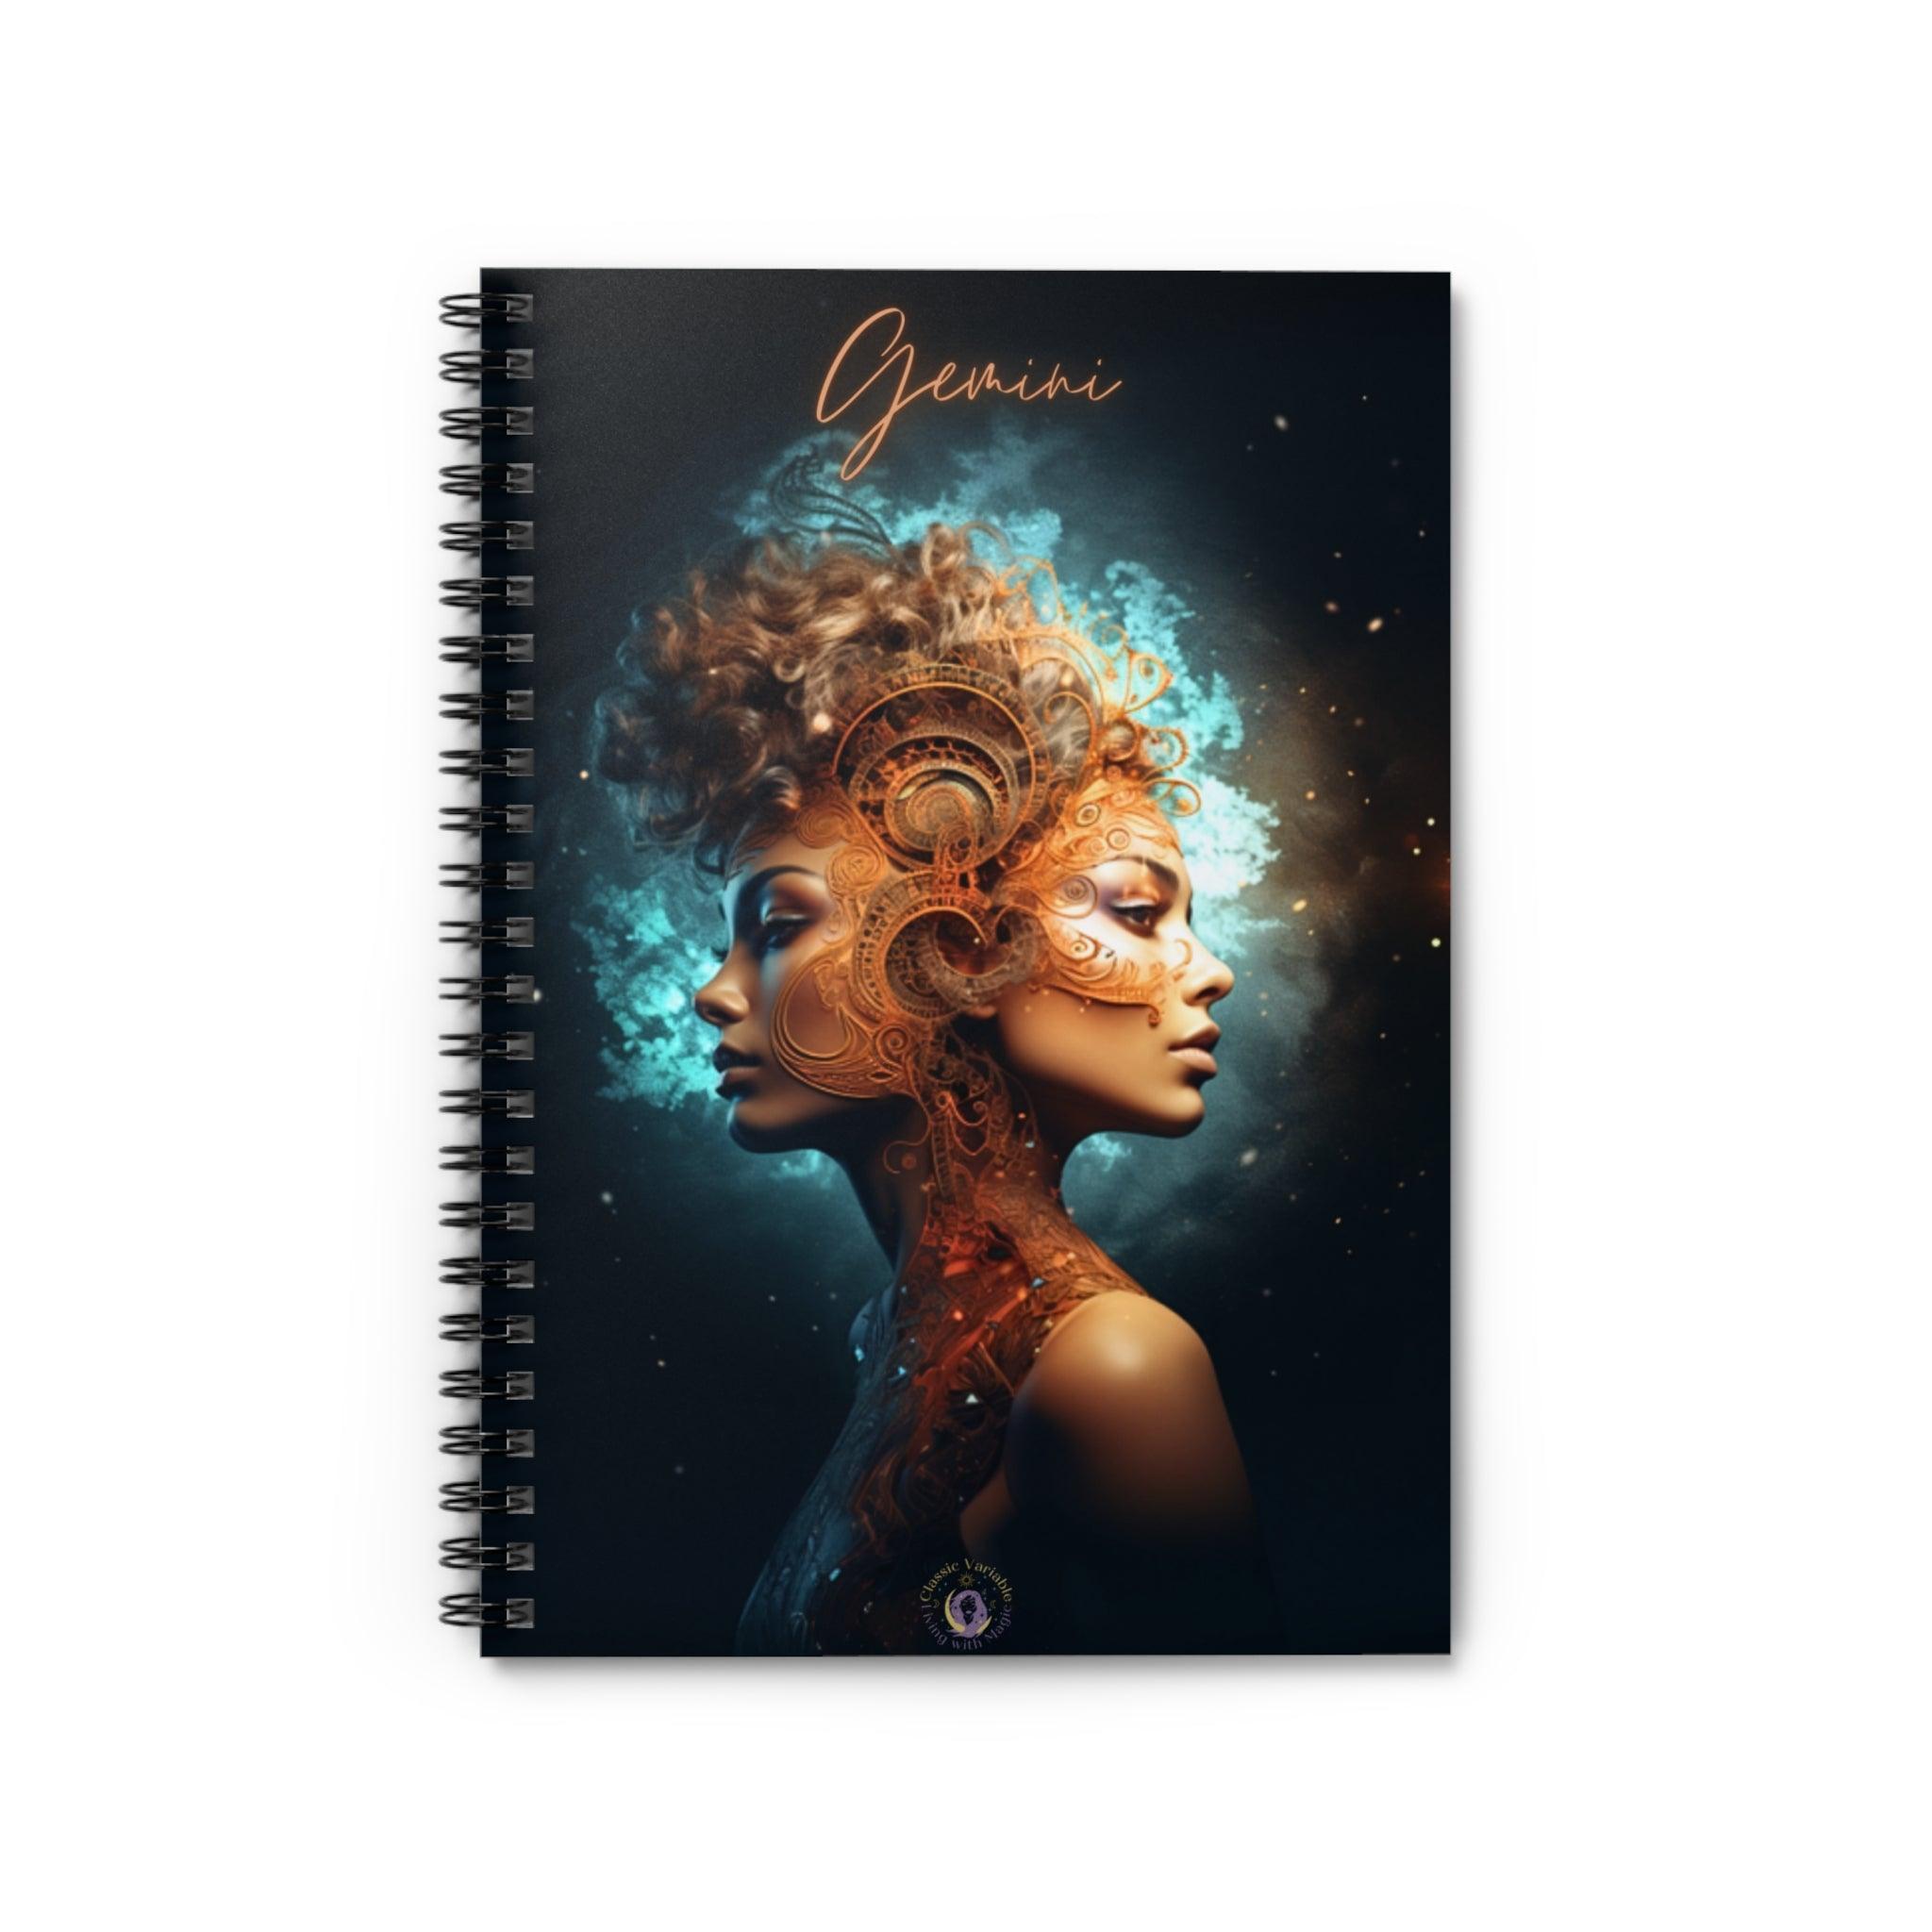 Gemini Spiral Notebook - Ruled Line - Classic Variable